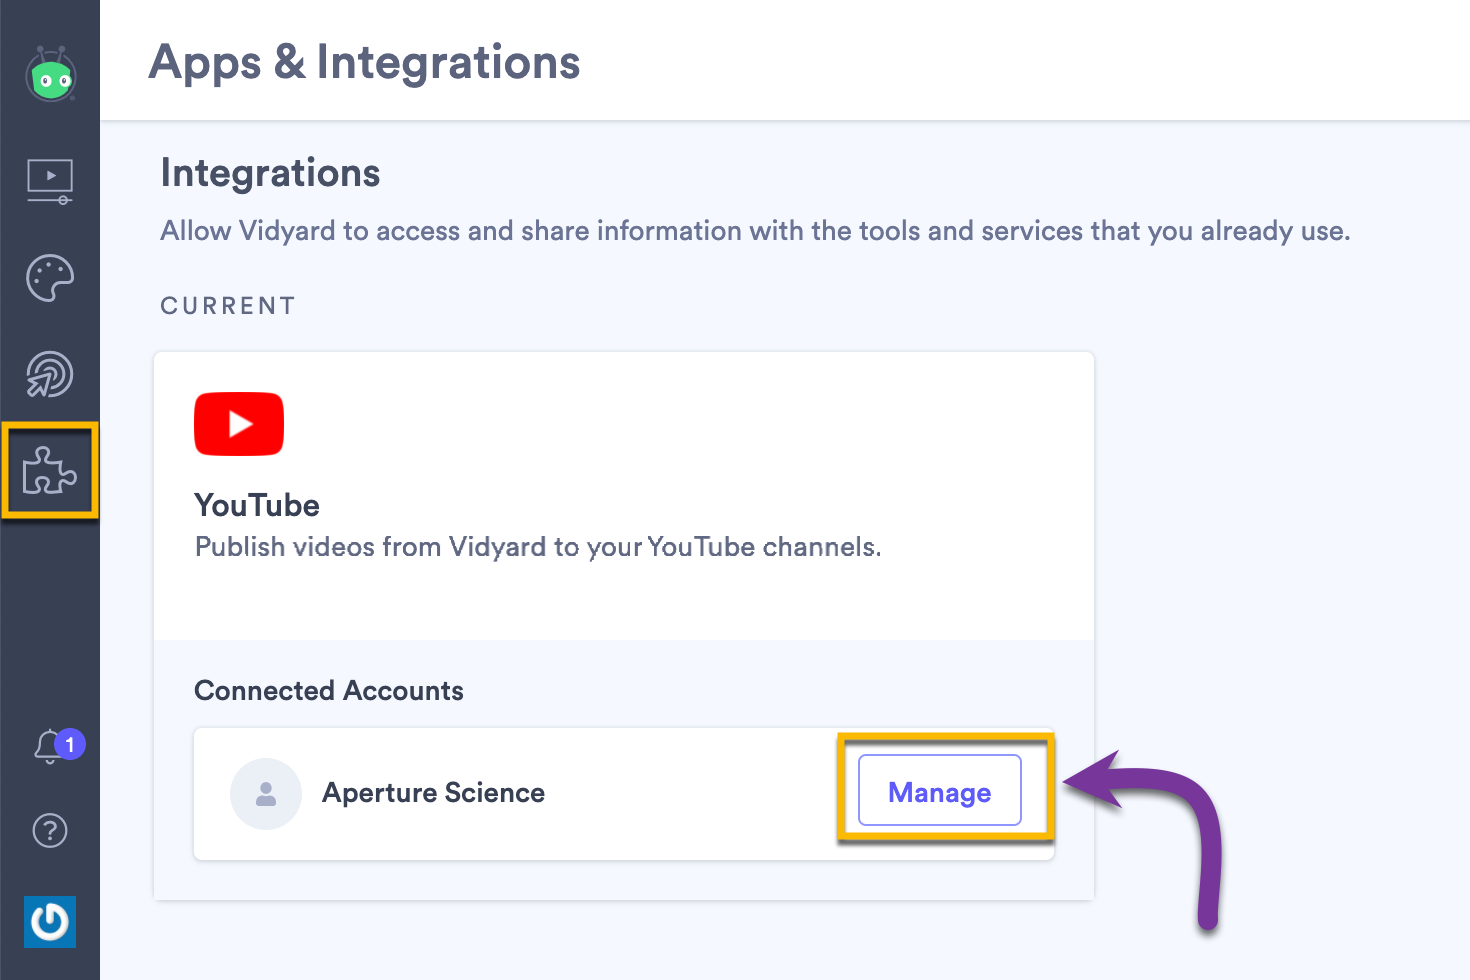 Managing your YouTube integration on the integrations page in Vidyard